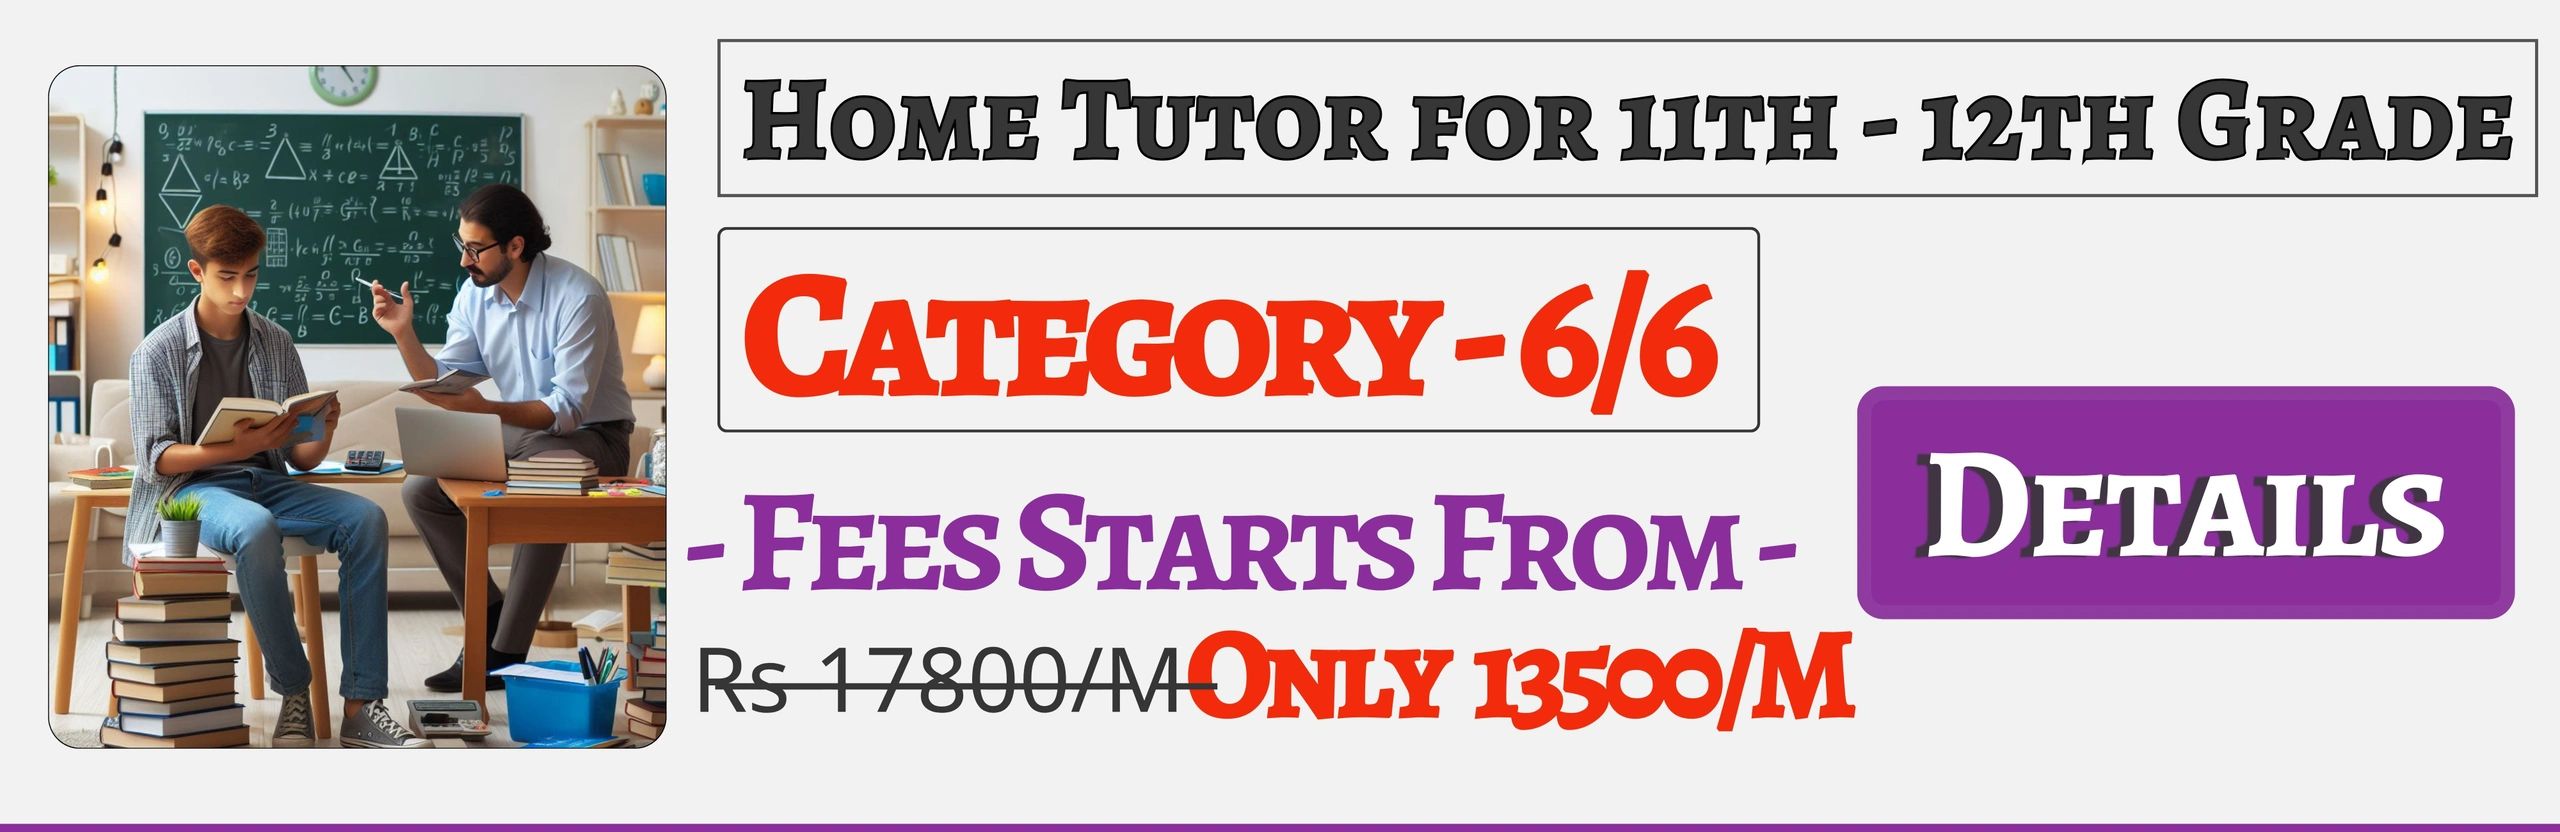 Book Best Home Tuition Tutors For 11th & 12th In Jaipur , Fees Only 13500/M